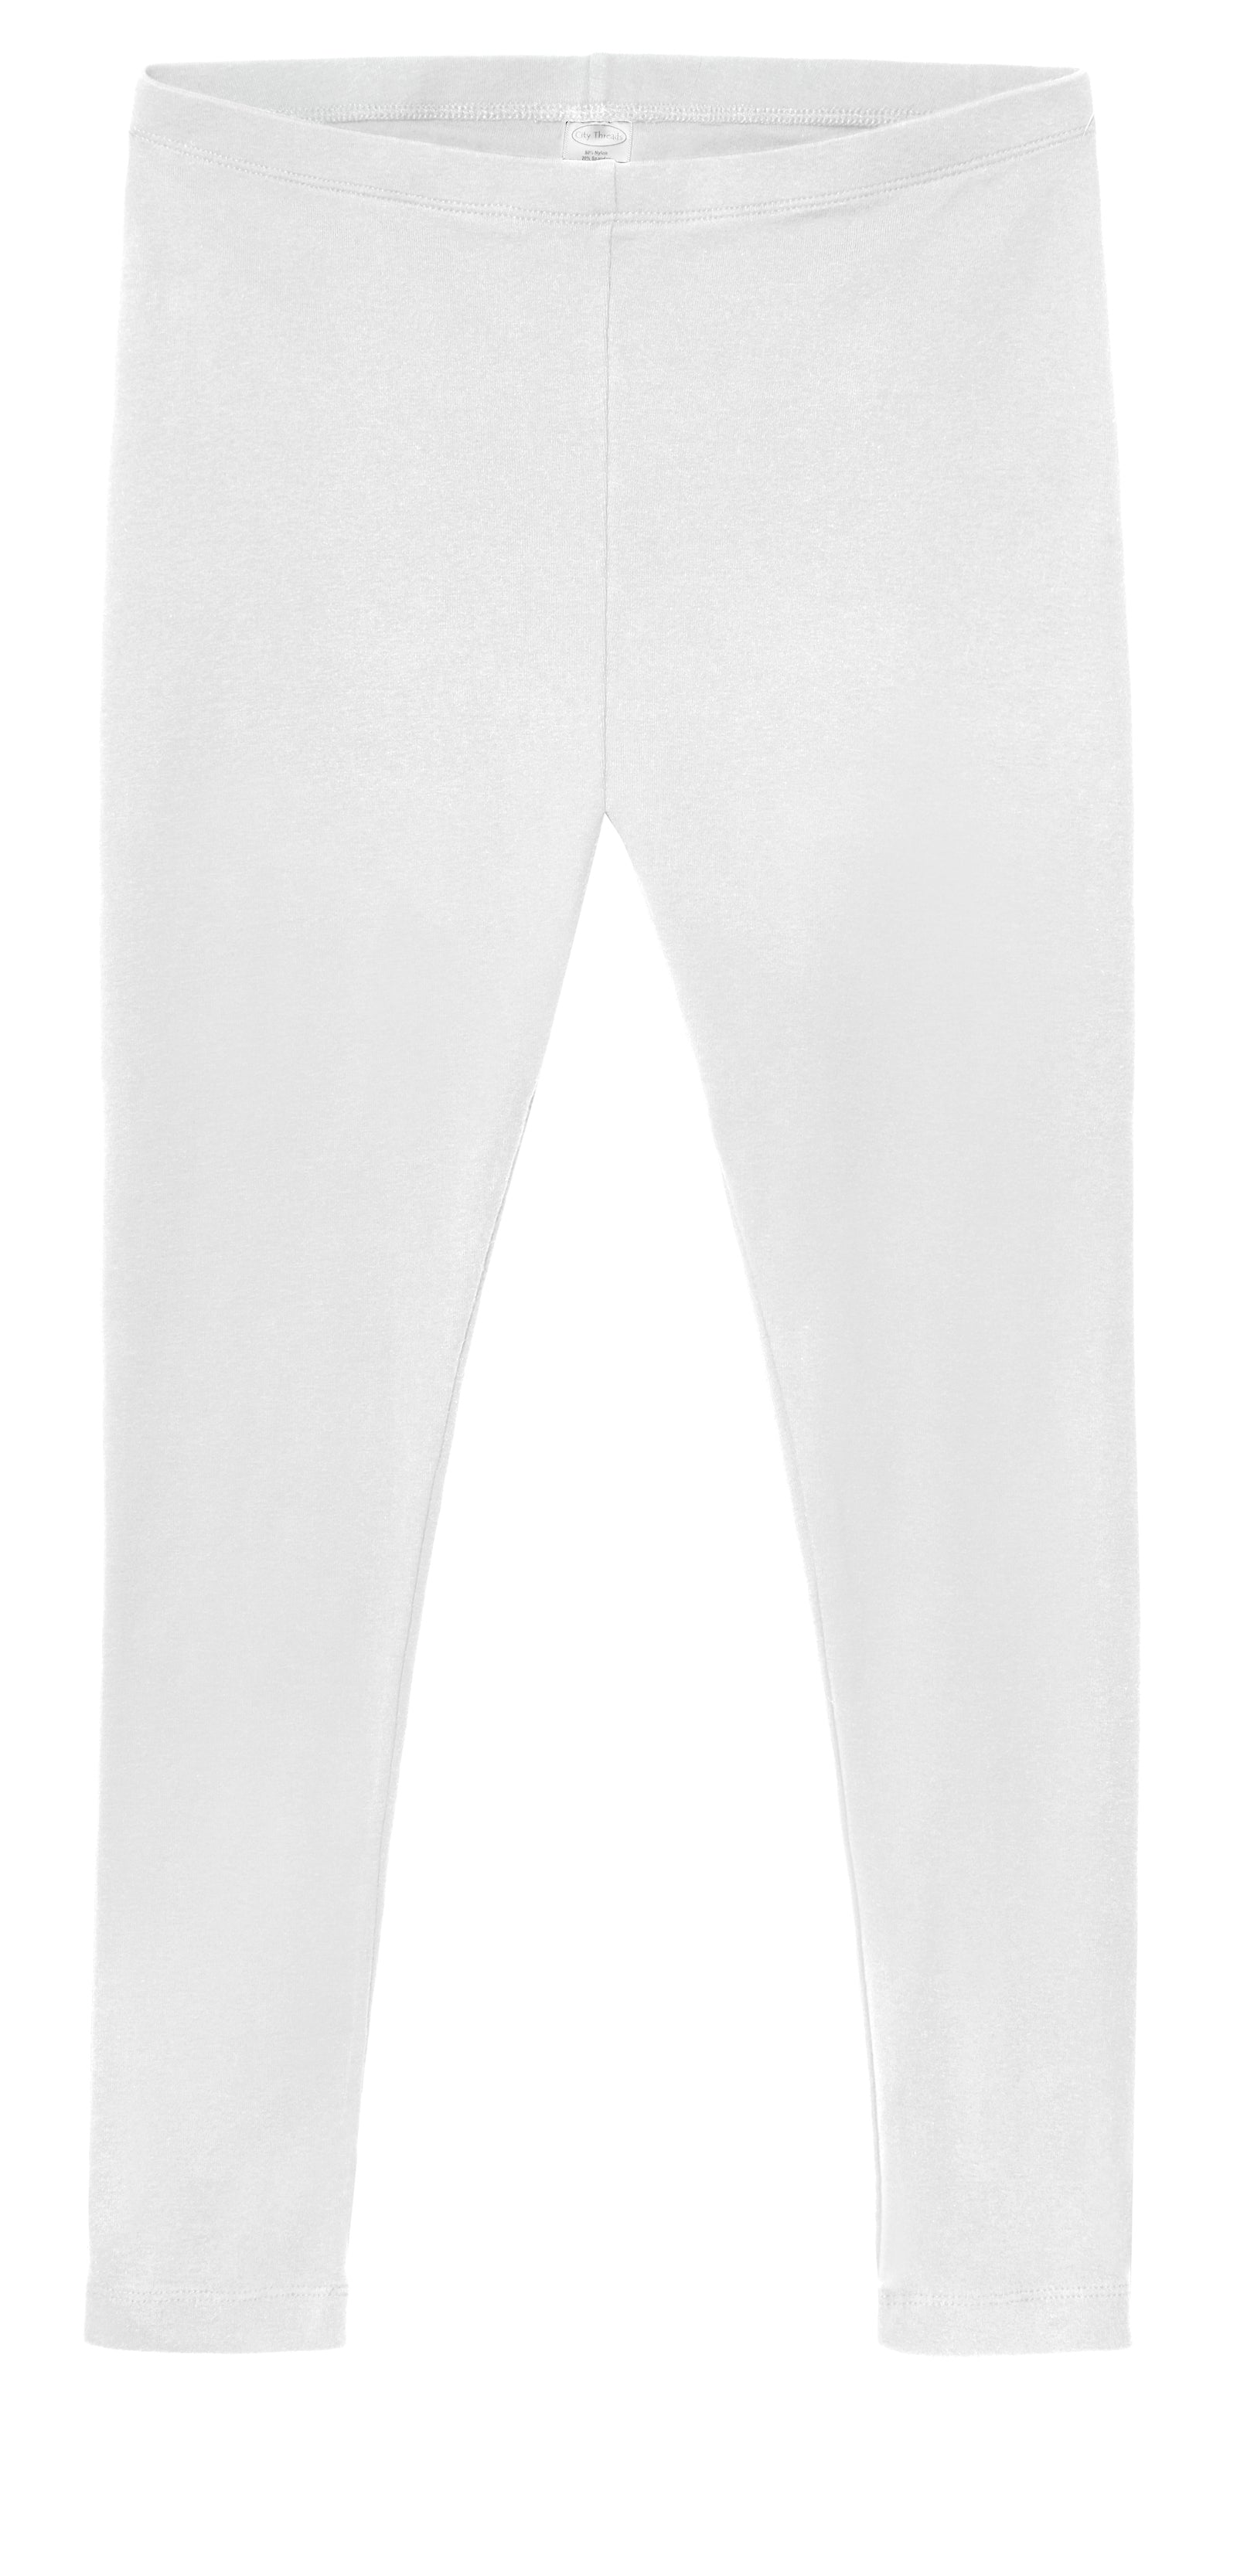 Girls Cotton White Leggings (14 to 19 Years)[Size M-(Waist 23 in,Length